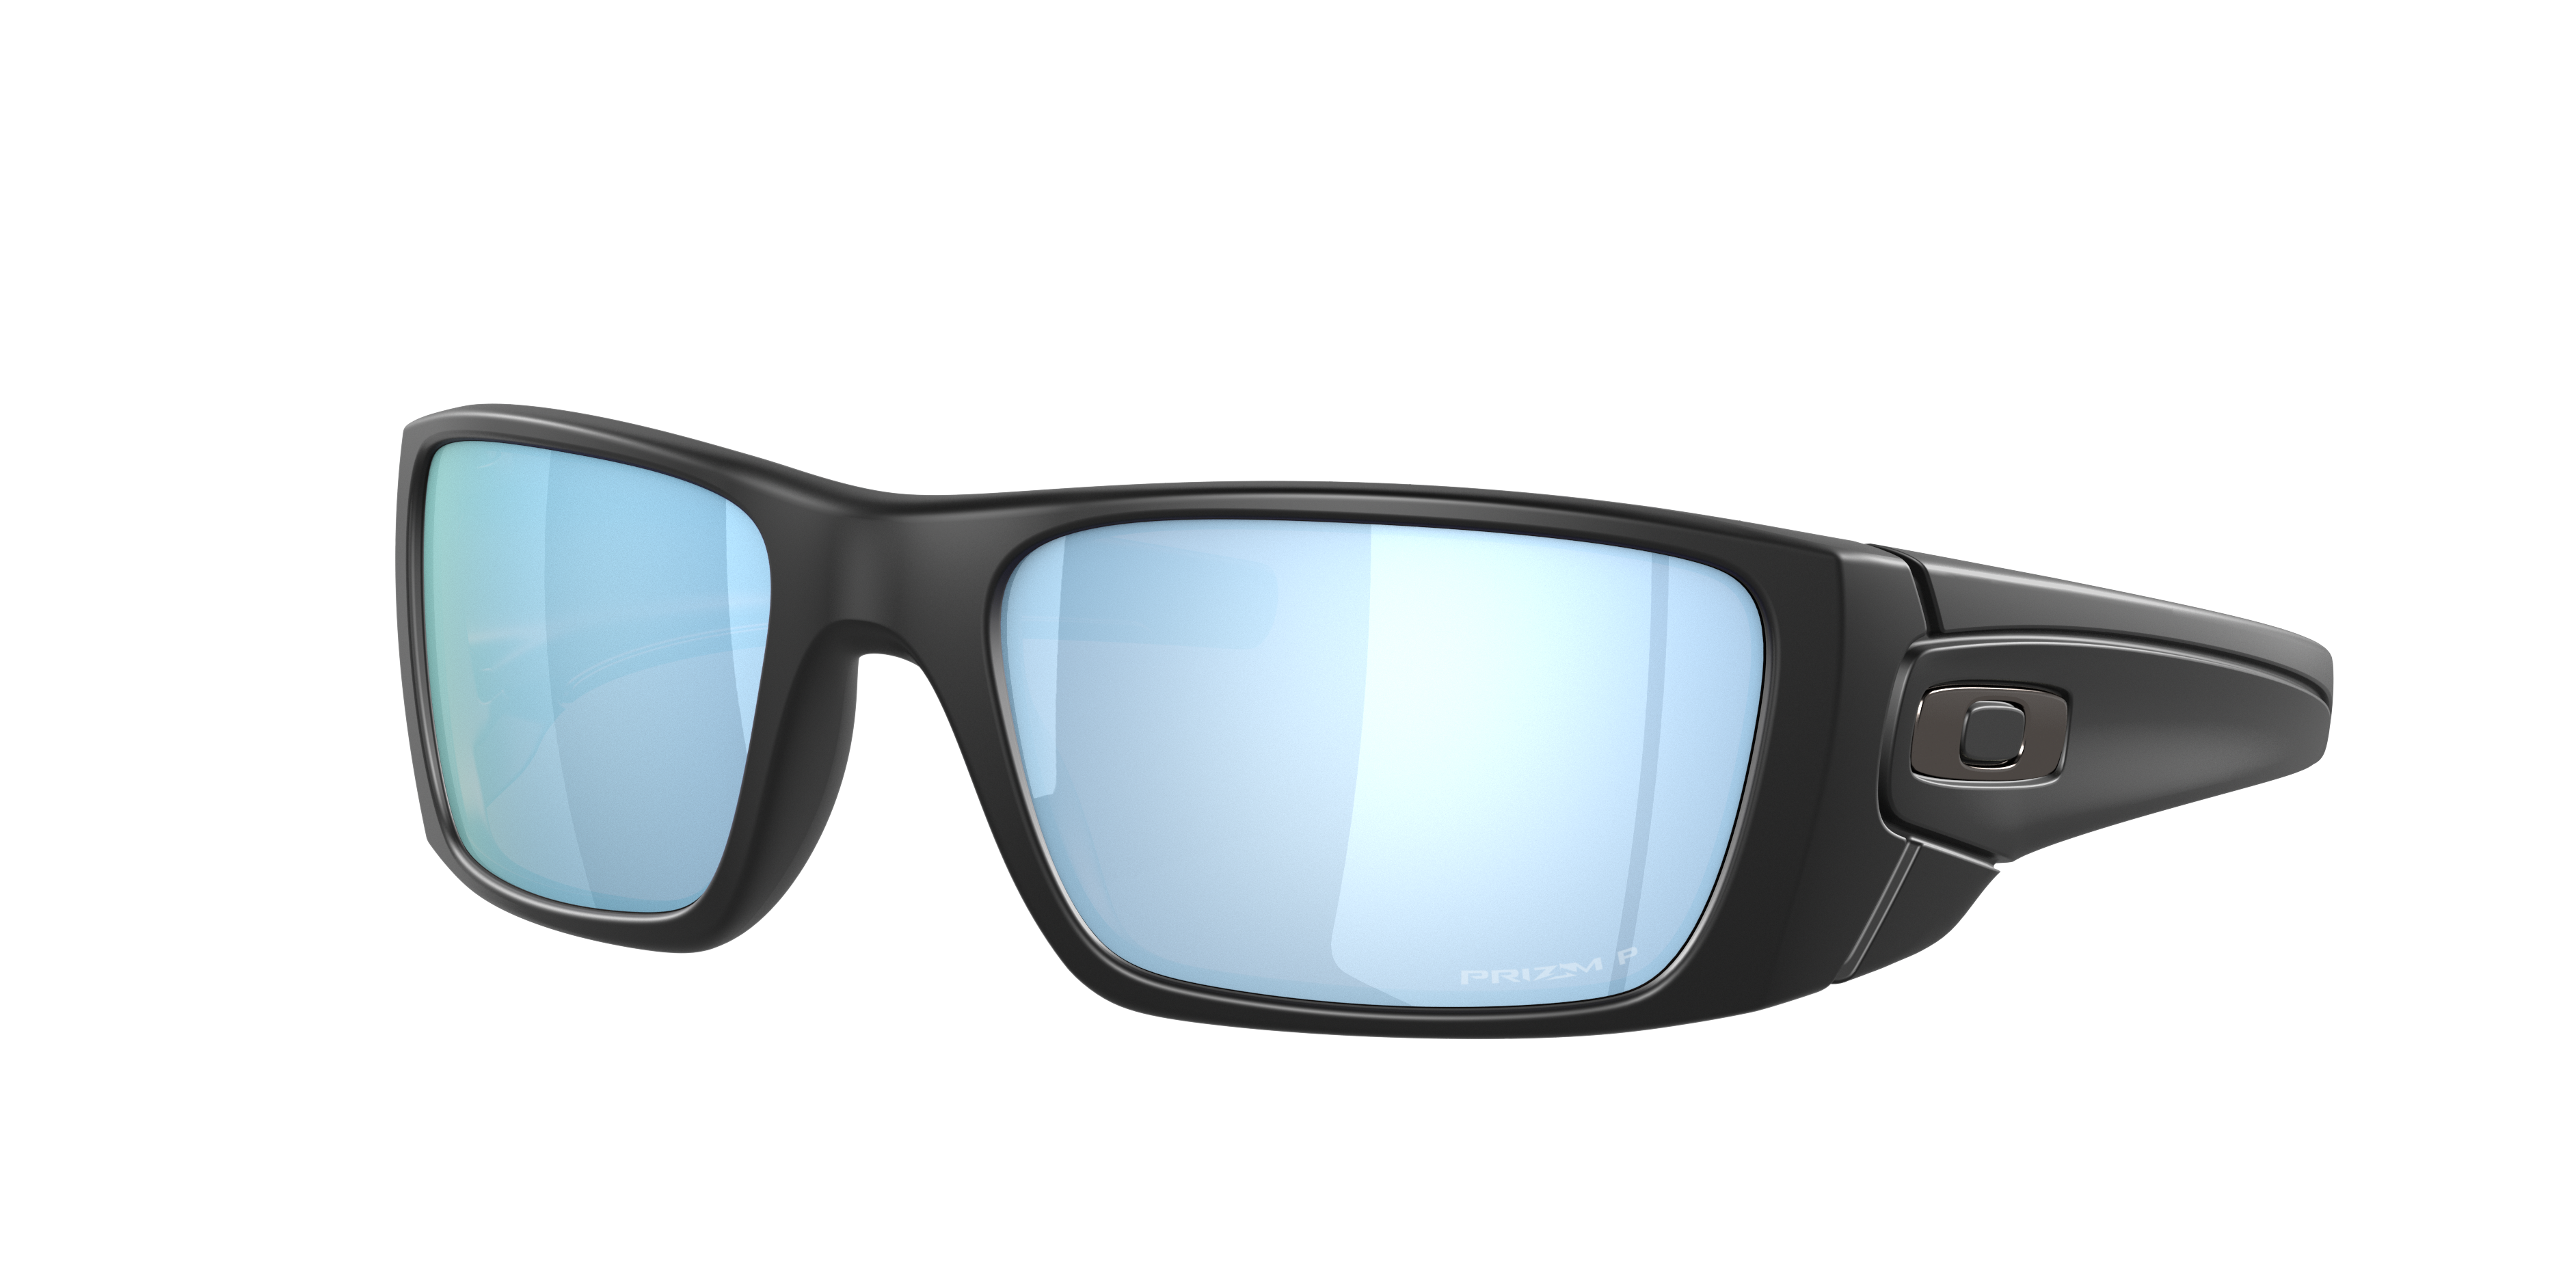 oakley fuel cell glasses